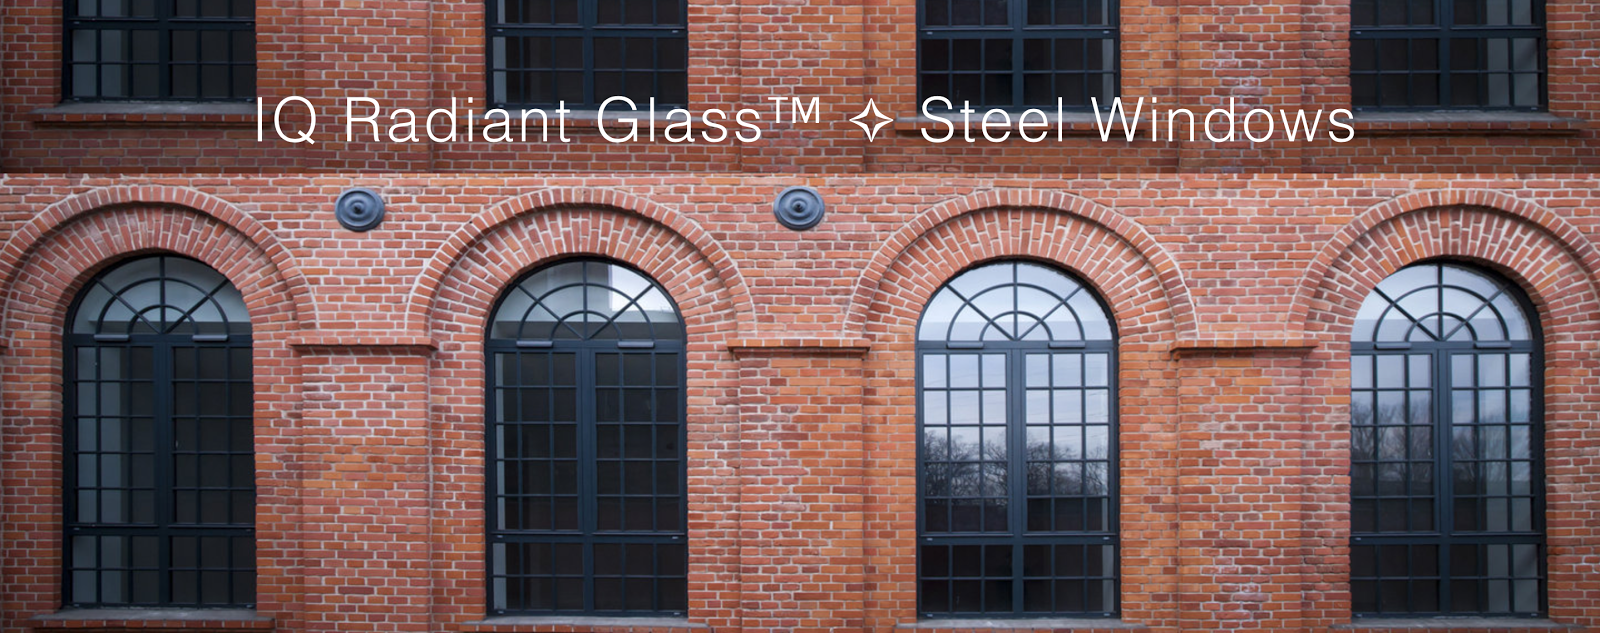 IQ Radiant Glass™ - Architectural Windows -  Radiant Heated Glass Window Systems